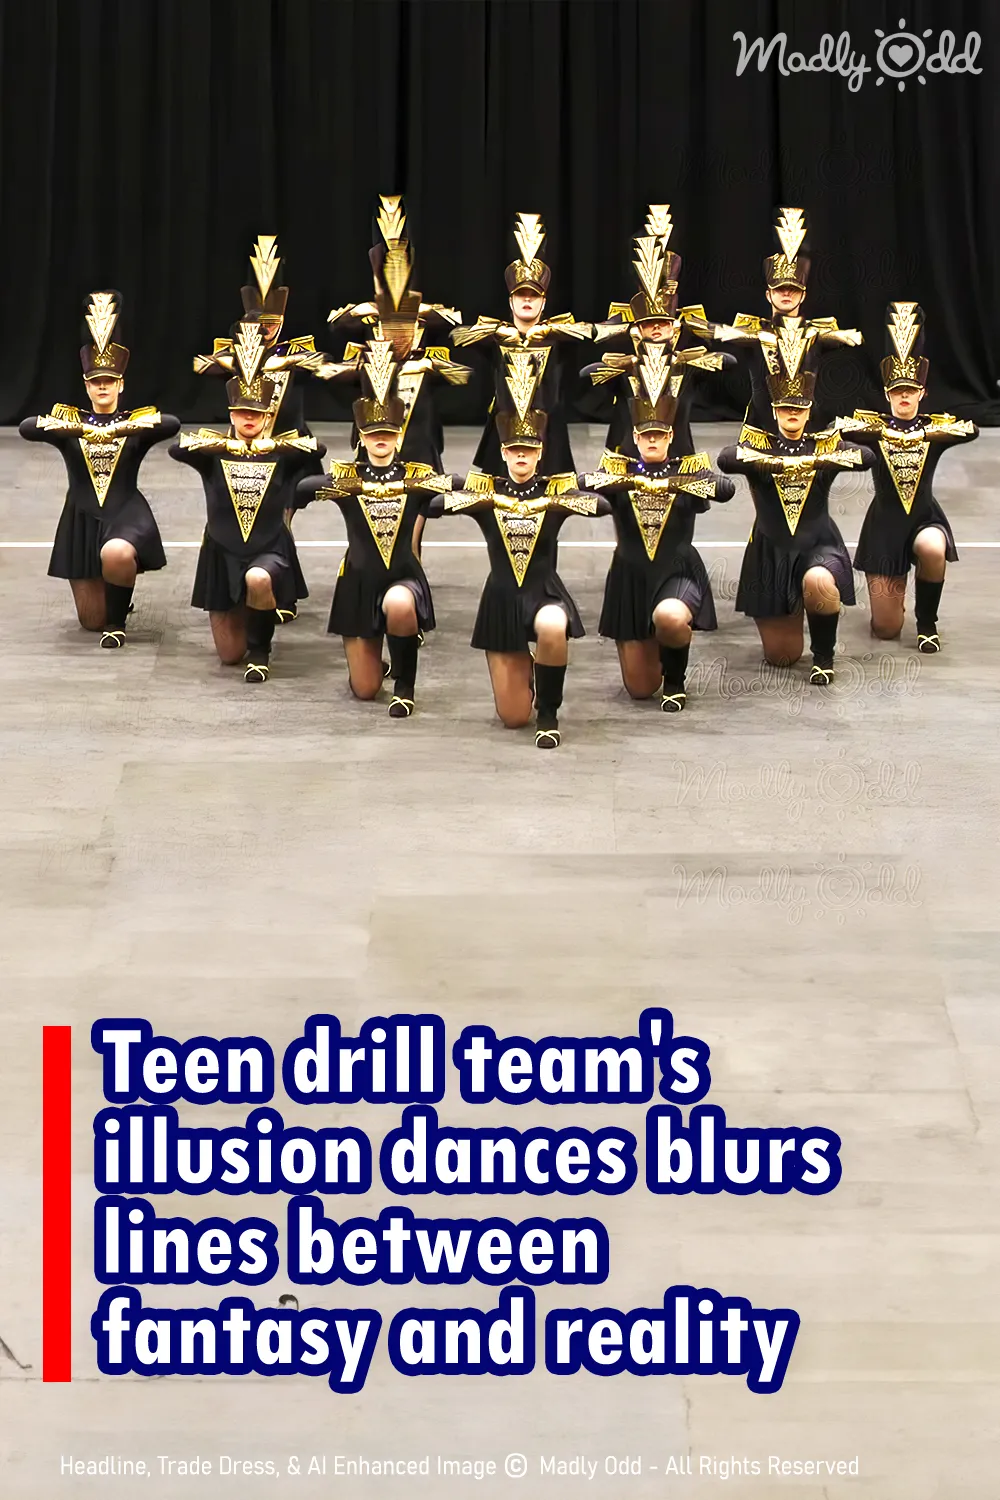 Teen drill team\'s illusion dances blurs lines between fantasy and reality